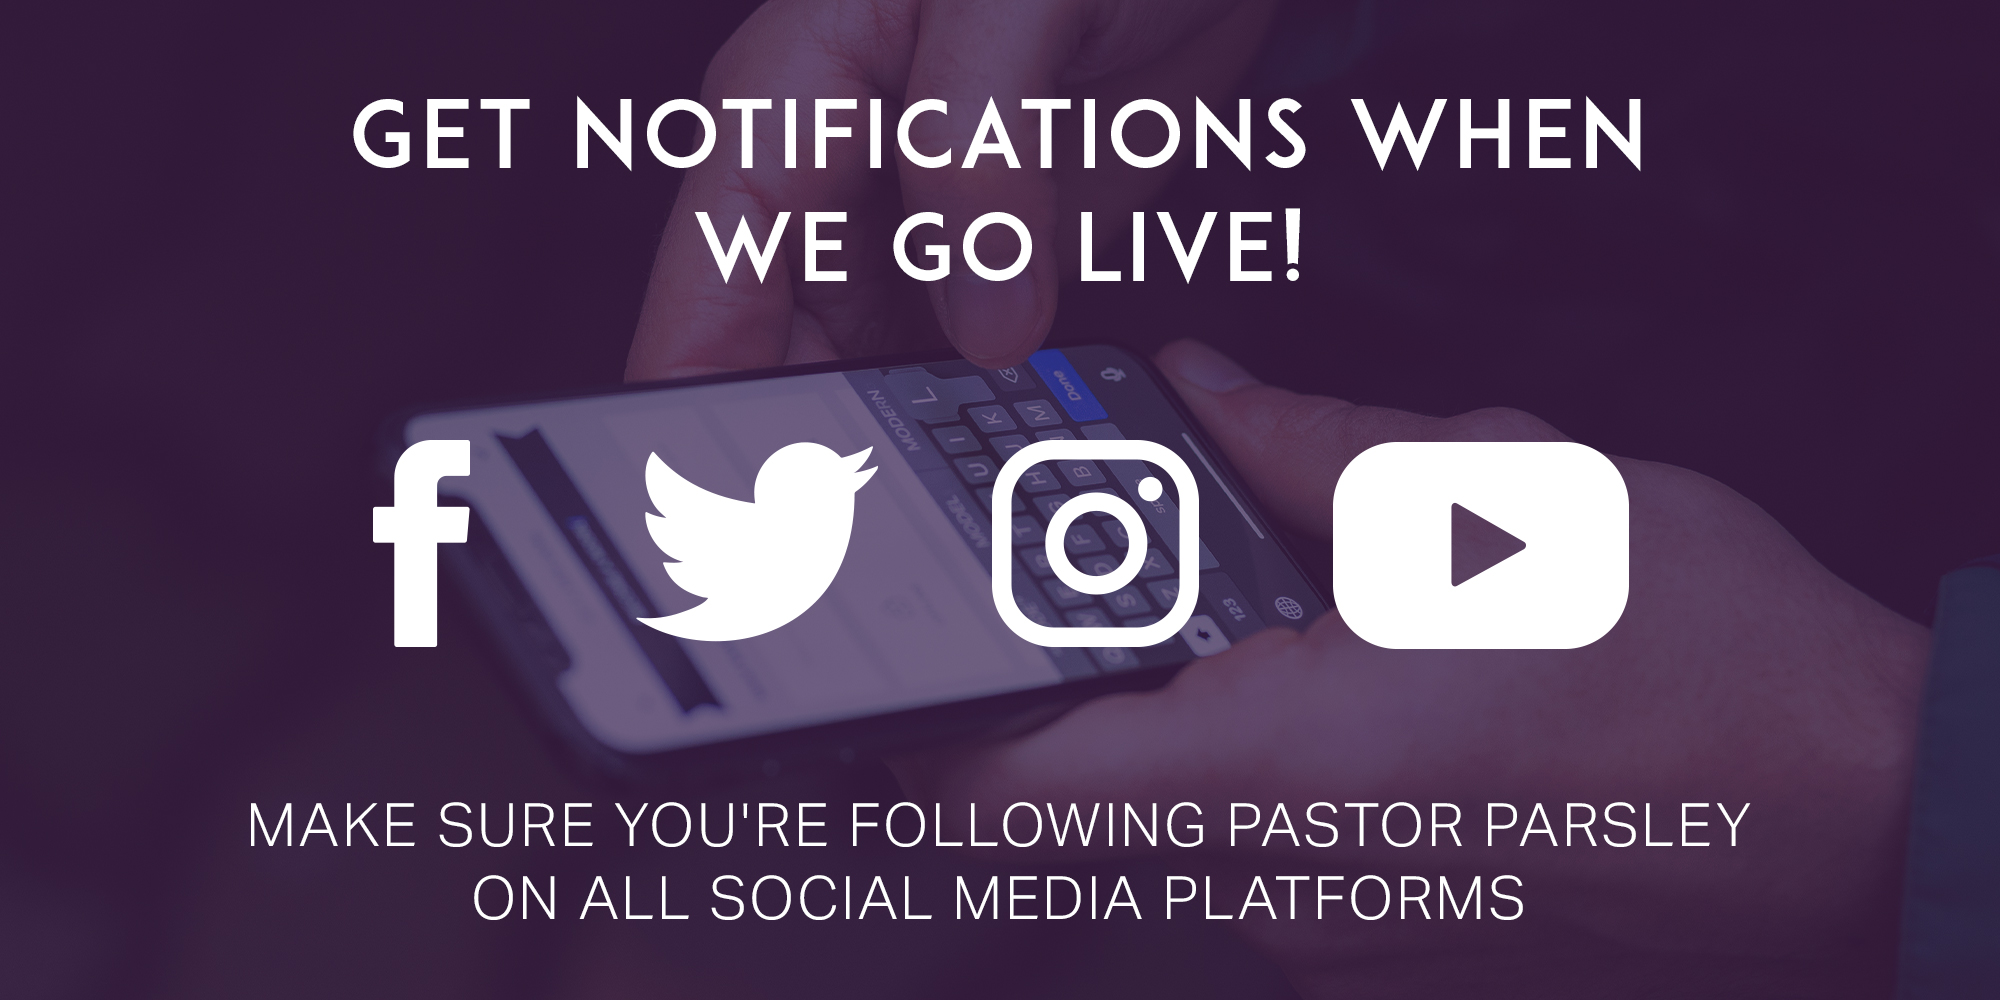 Get Notifications When We Go Live! Facebook Twitter Instagram Youtube Make Sure You're Following Pastor Parsley on All Social Media Platforms